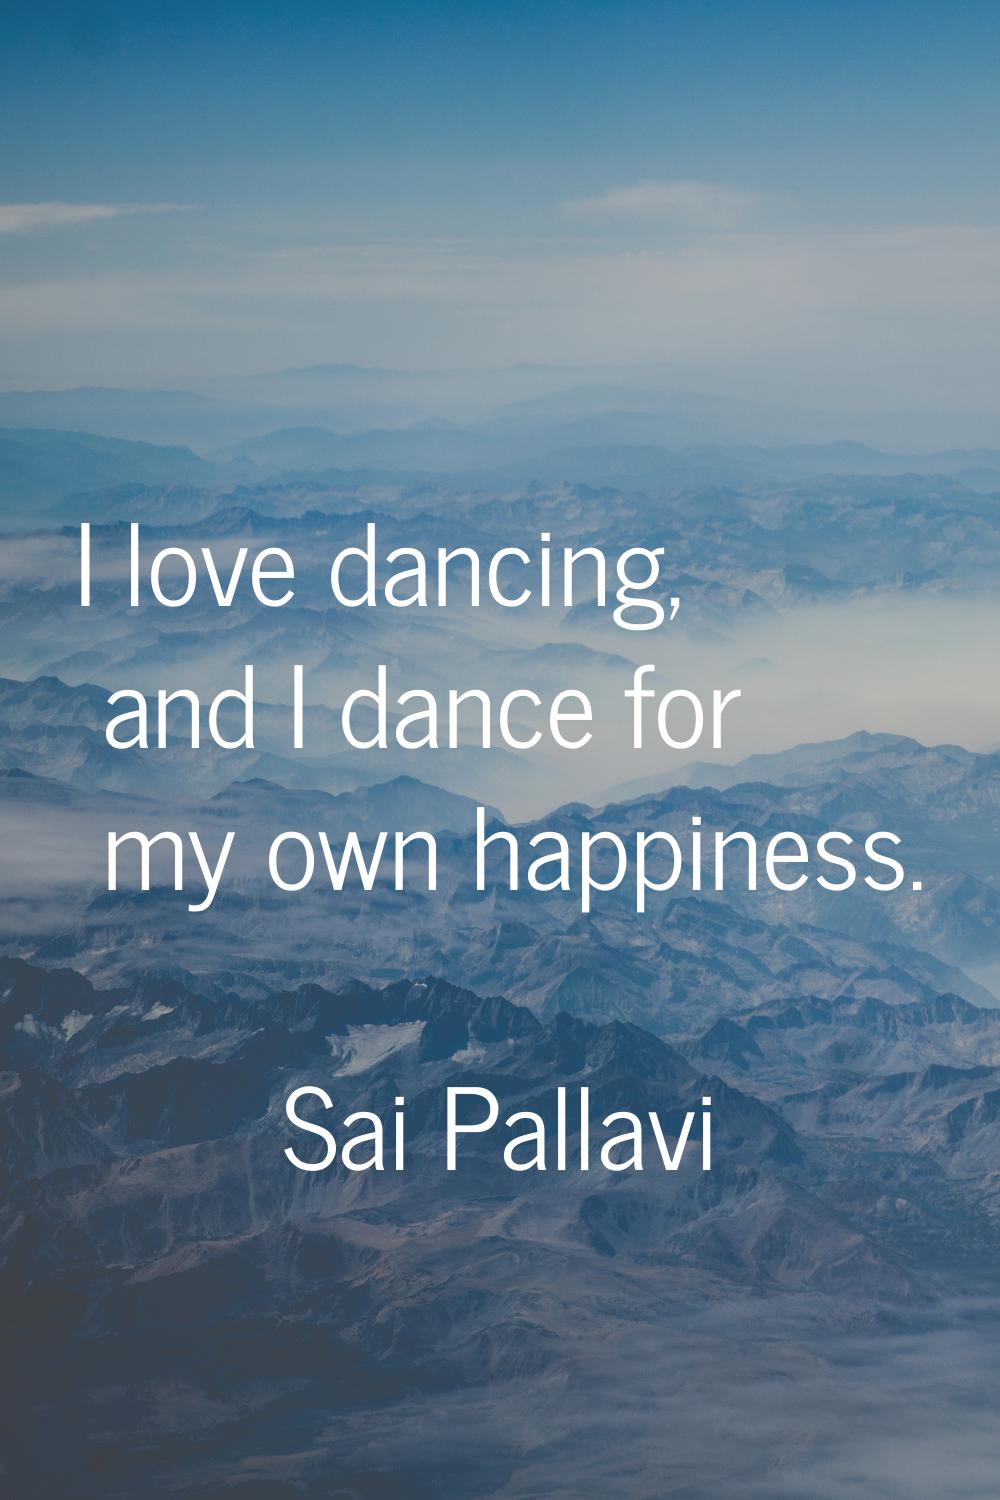 I love dancing, and I dance for my own happiness.